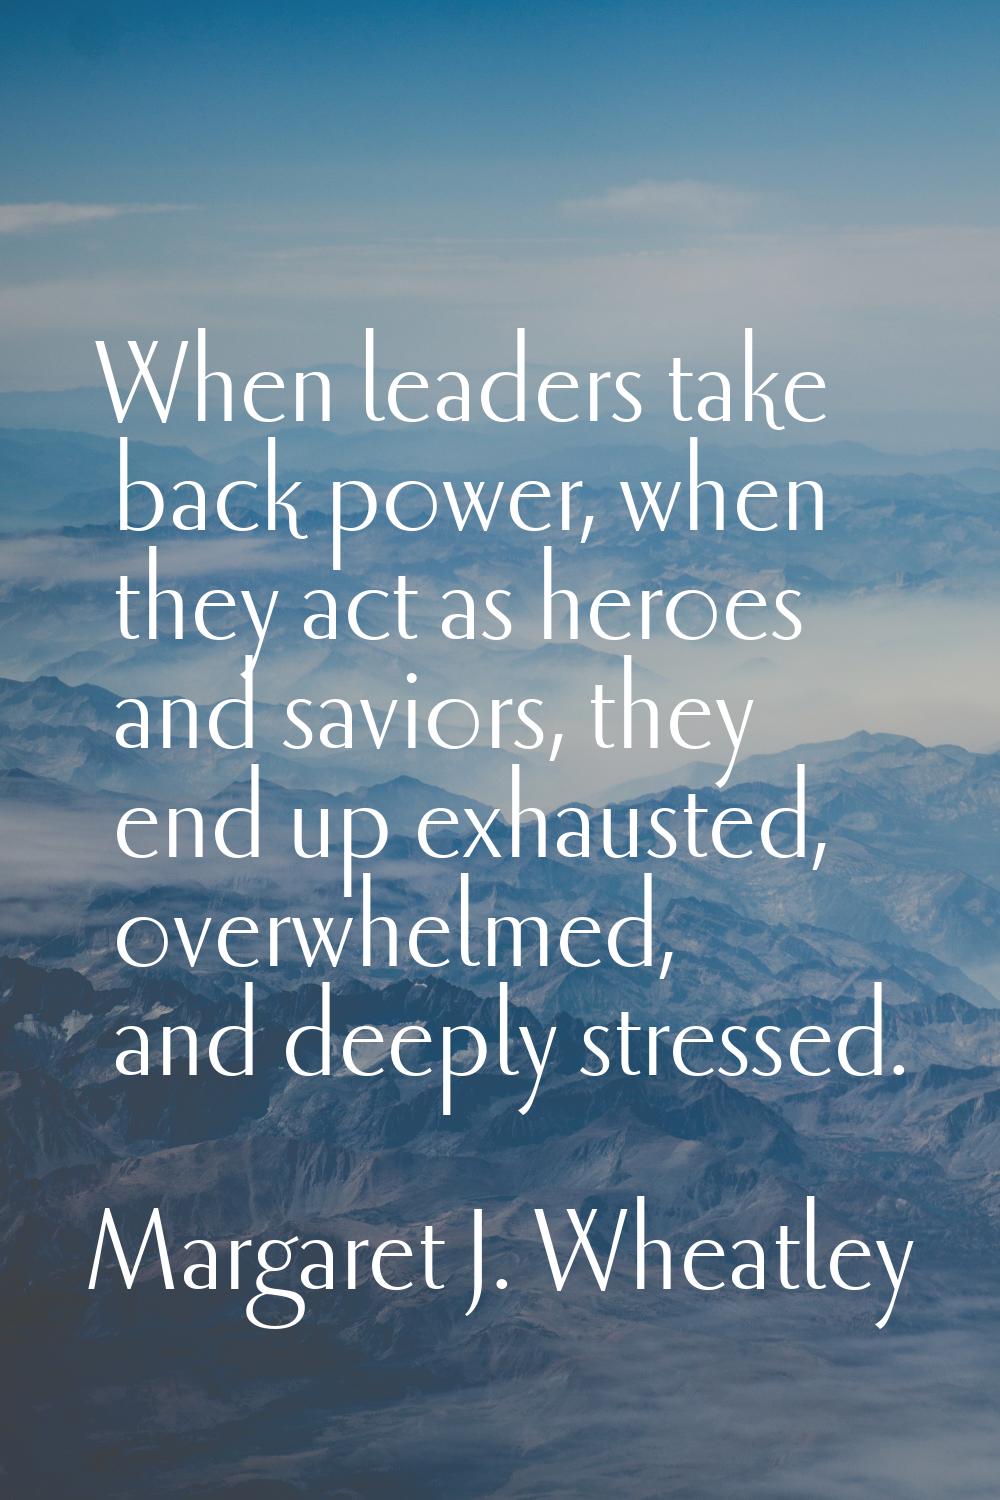 When leaders take back power, when they act as heroes and saviors, they end up exhausted, overwhelm